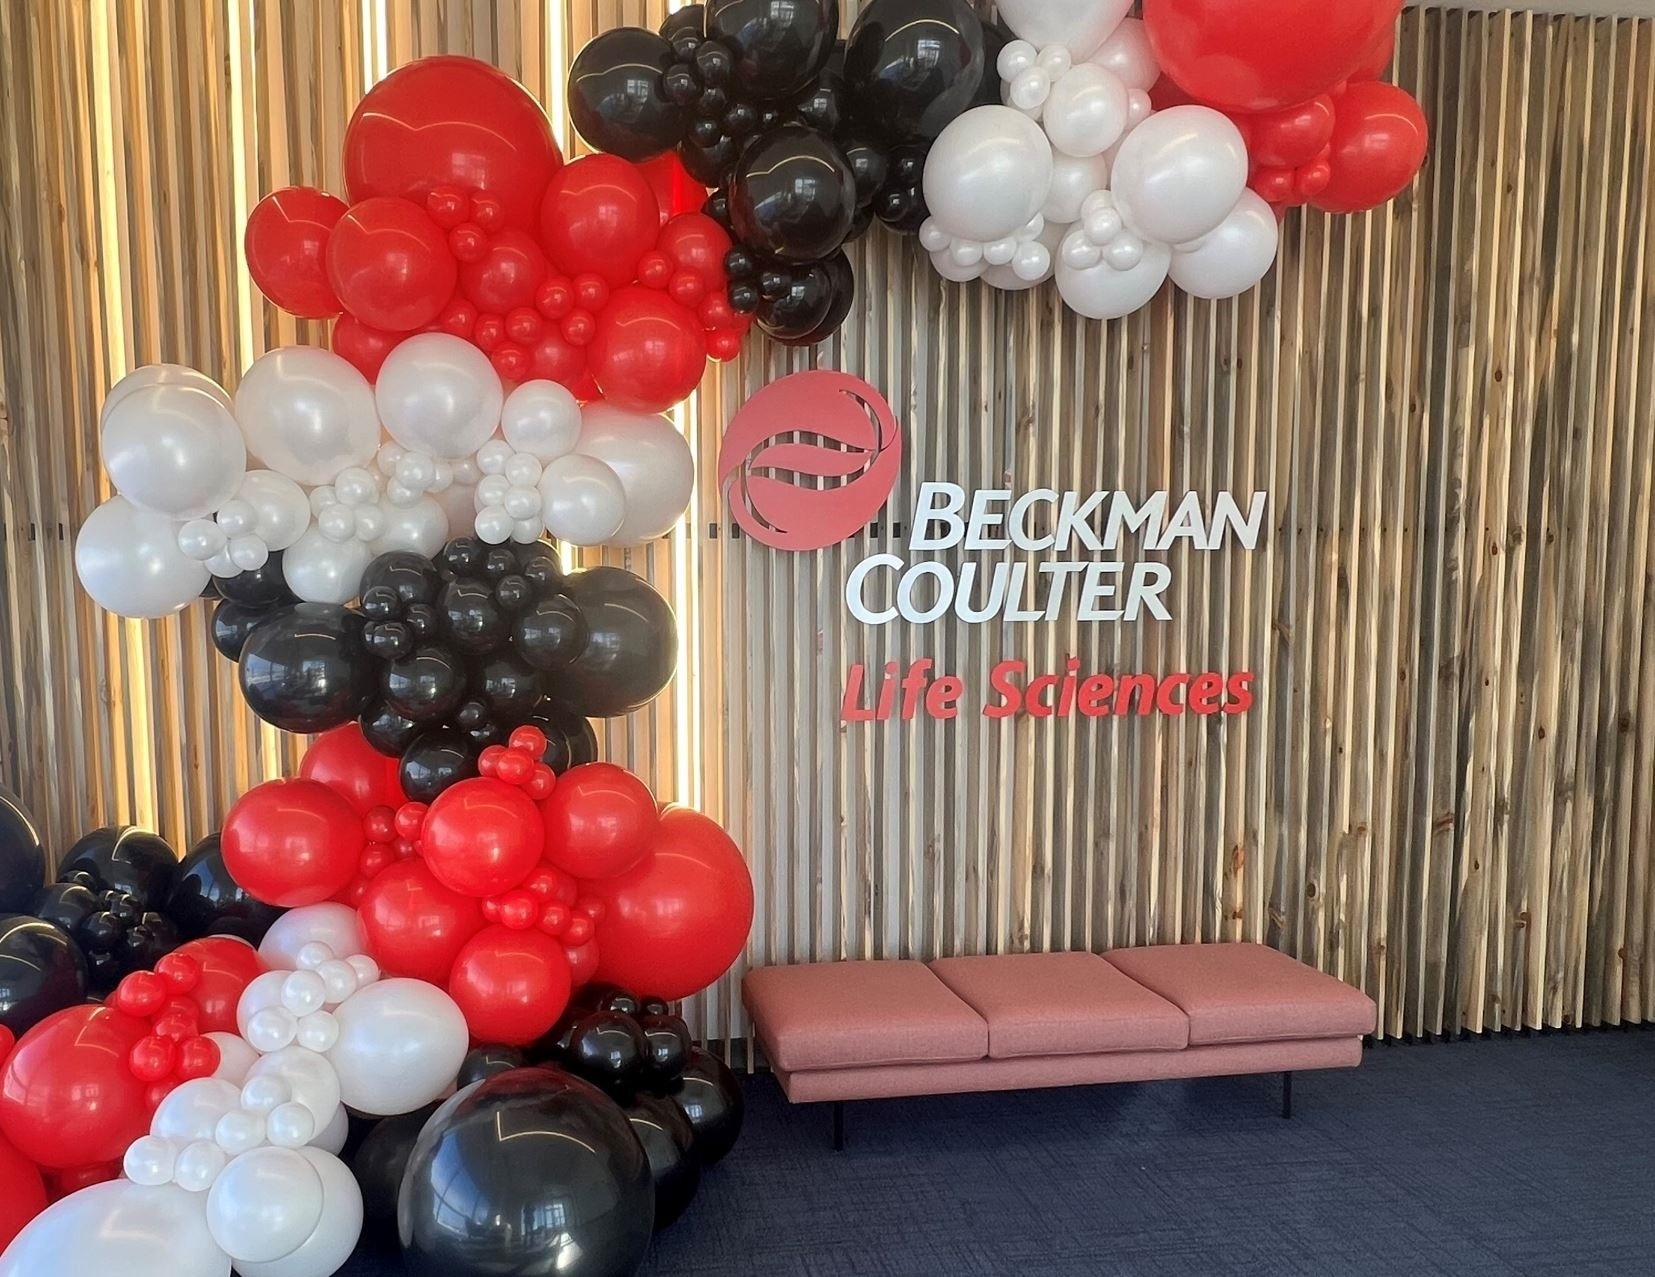 Beckman Coulter Life Sciences completes first phase of Colorado Research and Development Hub with grand opening of $10 million Loveland offices